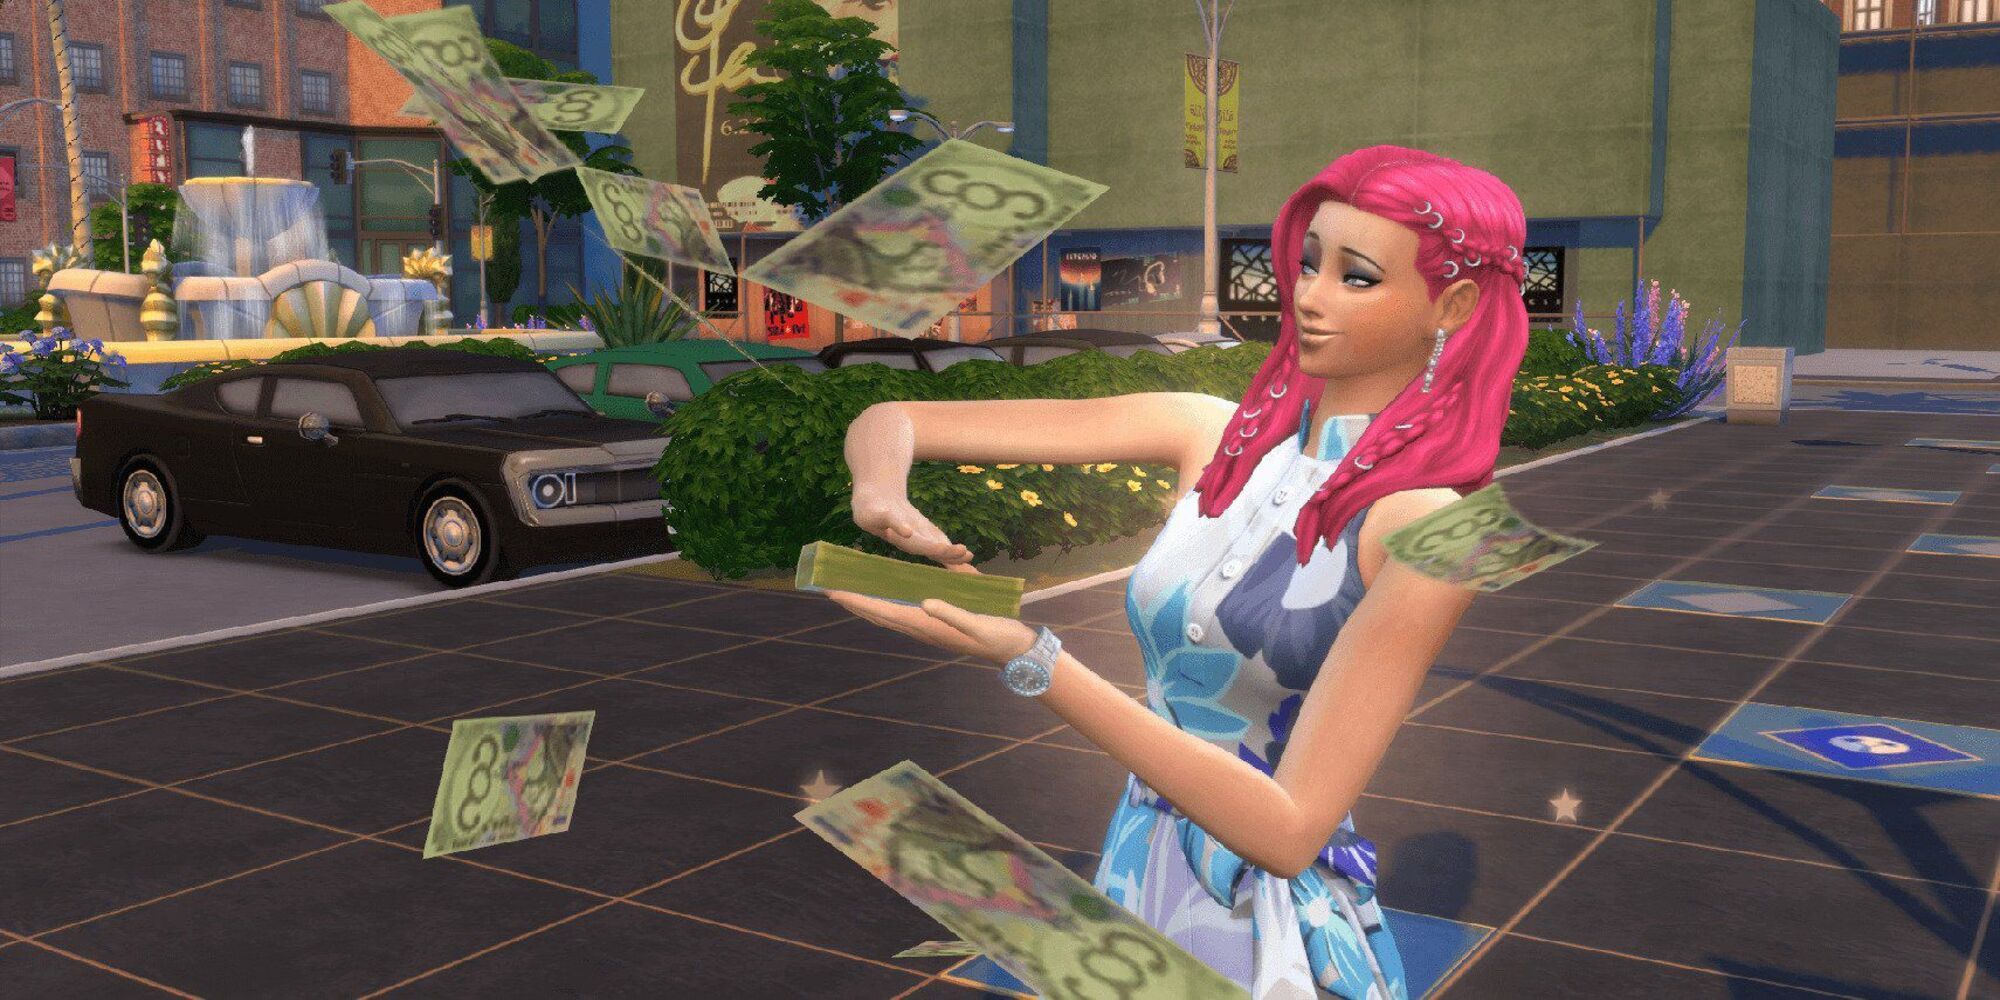 How To Earn Money Fast In Sims 4